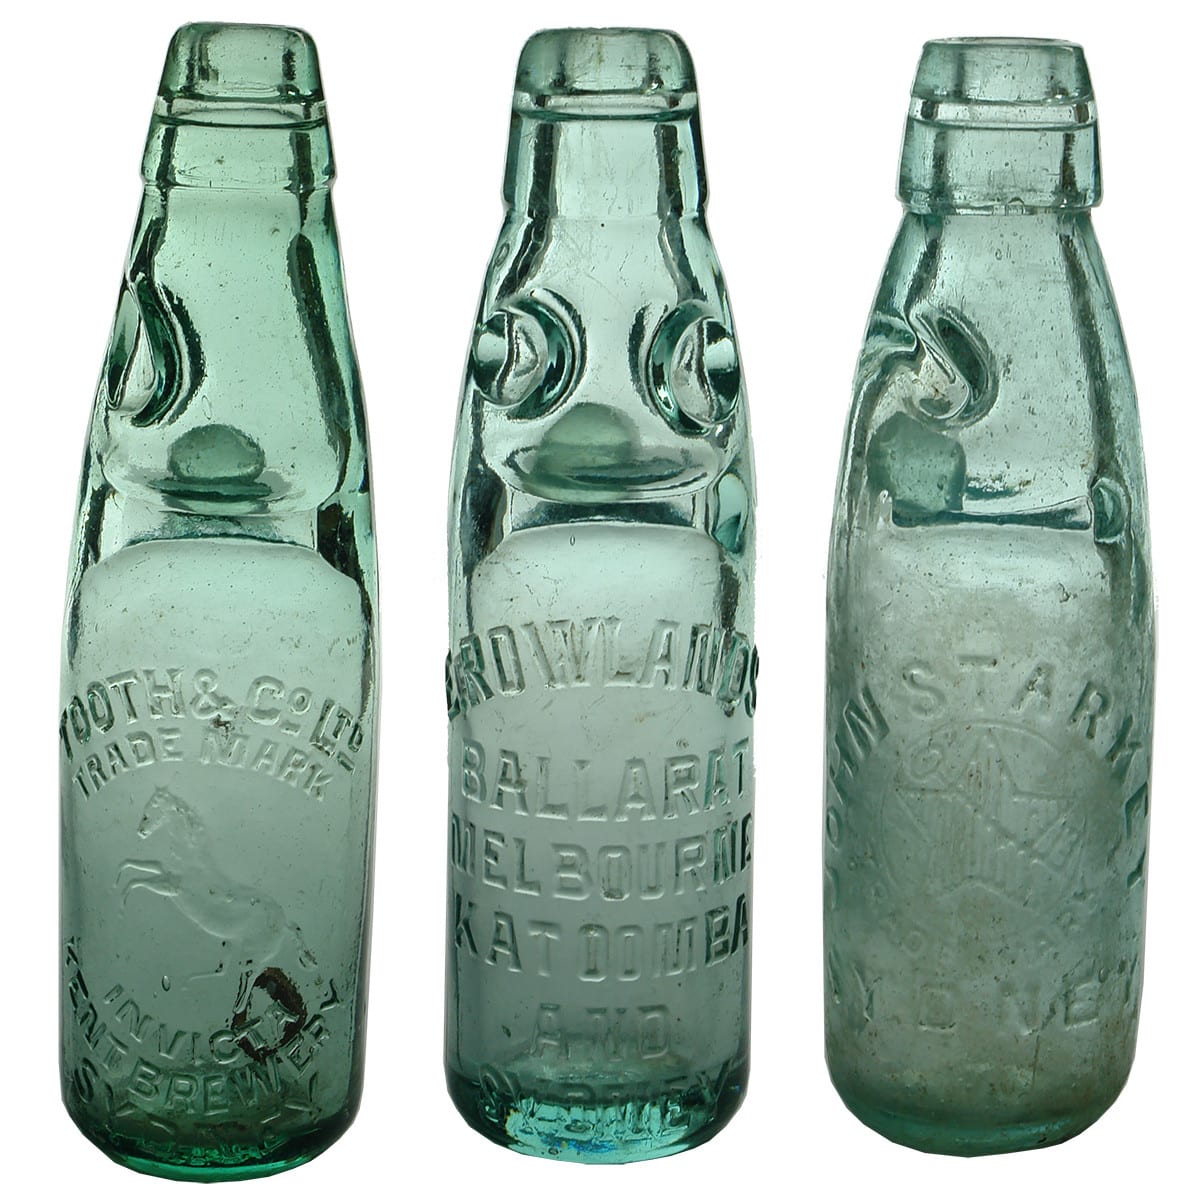 Three Codds: Tooth & Co Ltd, Sydney; E. Rowlands, Four Cities; John Starkey, Codd's Bottle. (New South Wales & Victoria)